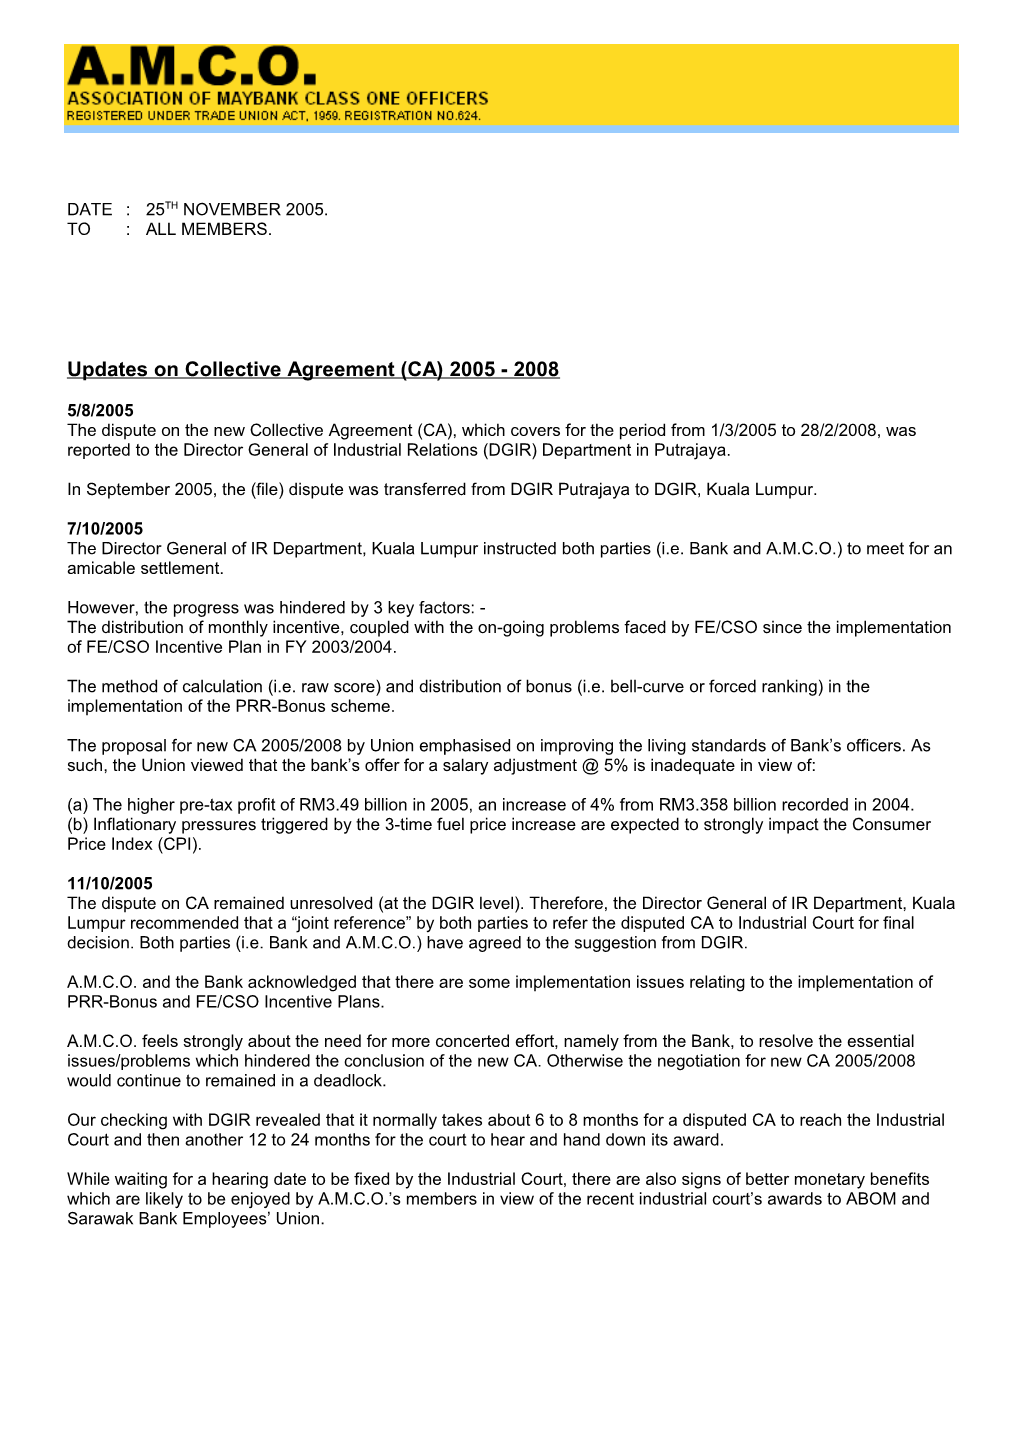 Updates on Collective Agreement (CA)2005-2008